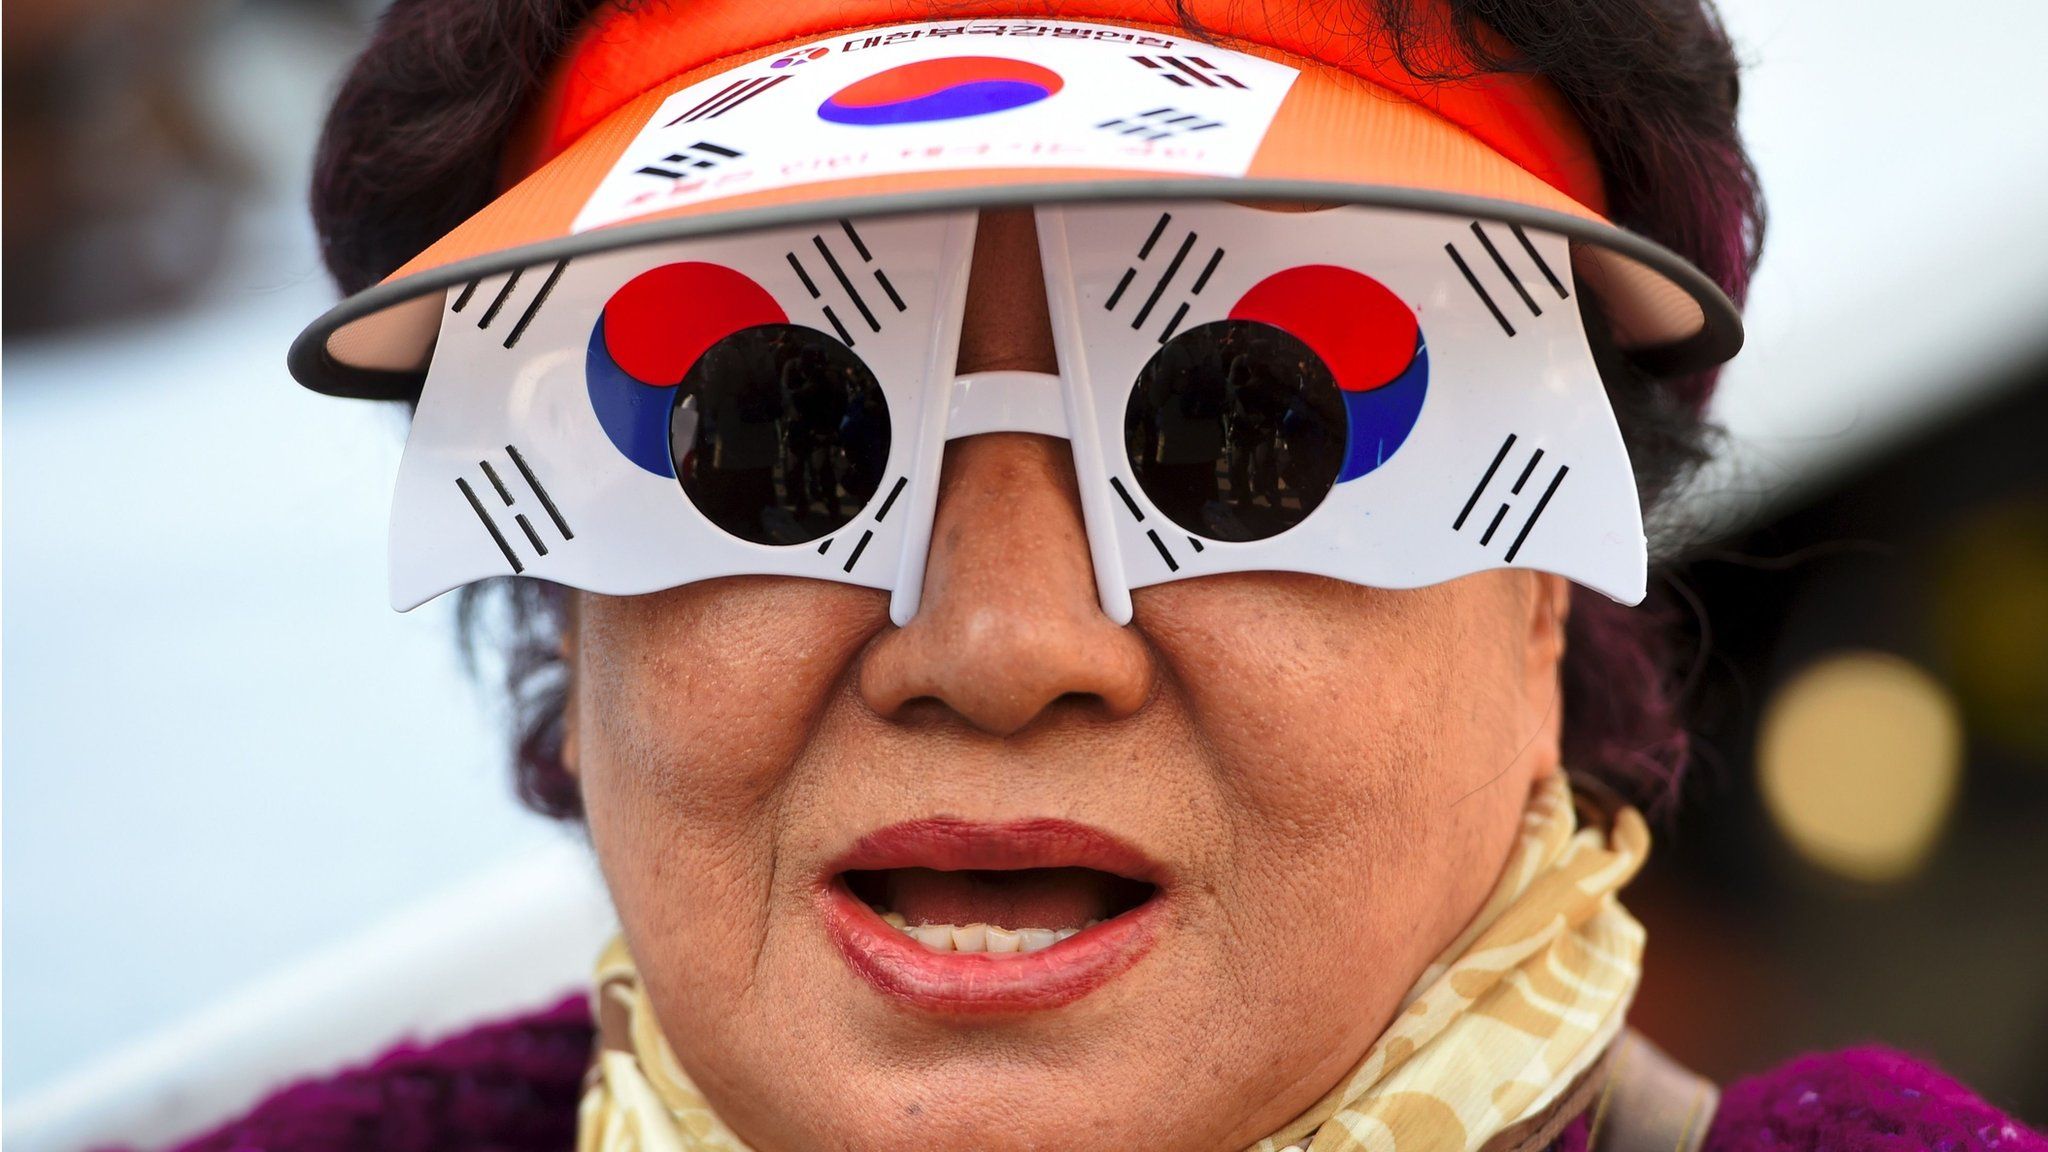 A supporter of South Korea's impeached-President Park Geun-hye wears glasses decorated as the South Korean national flag, on March 11, 2017, in Seoul, South Korea.